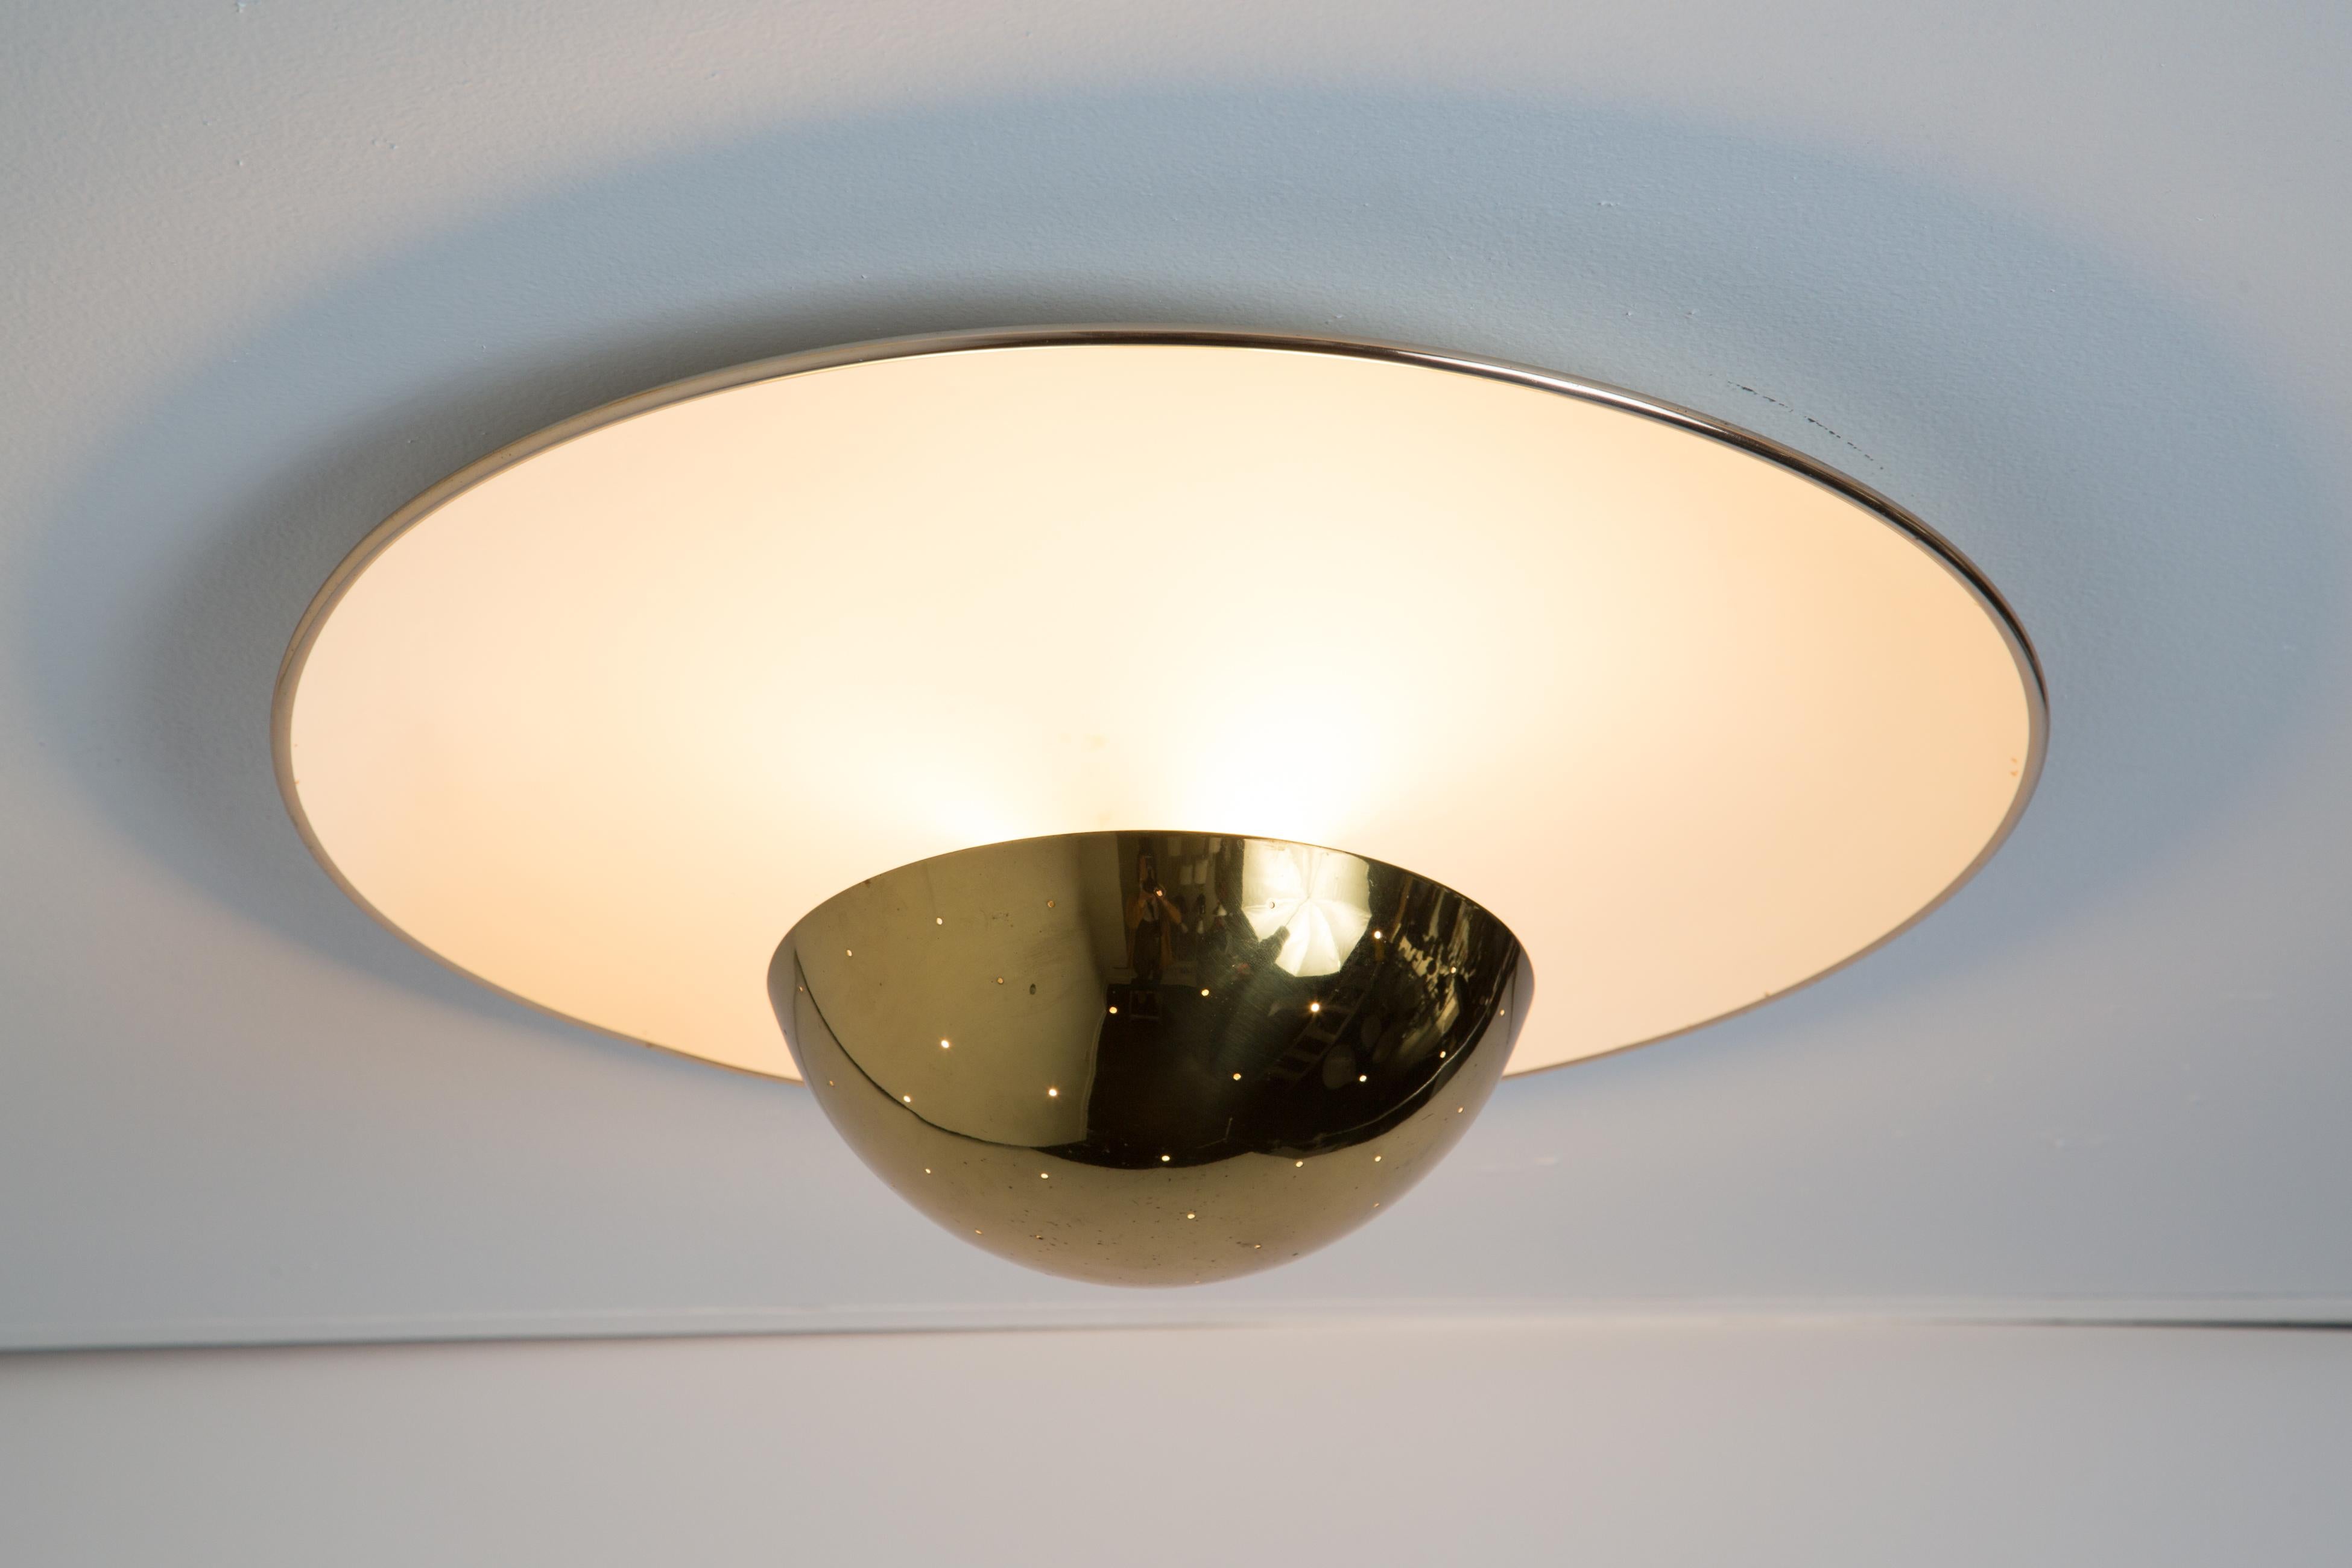 1950s Gino Sarfatti model #155 ceiling lamp for Arteluce. A perforated brass dome on a white painted metal curved plate with a brass detail on the edge. An extremely attractively scaled ceiling or wall light of incomparably refined design. Arteluce